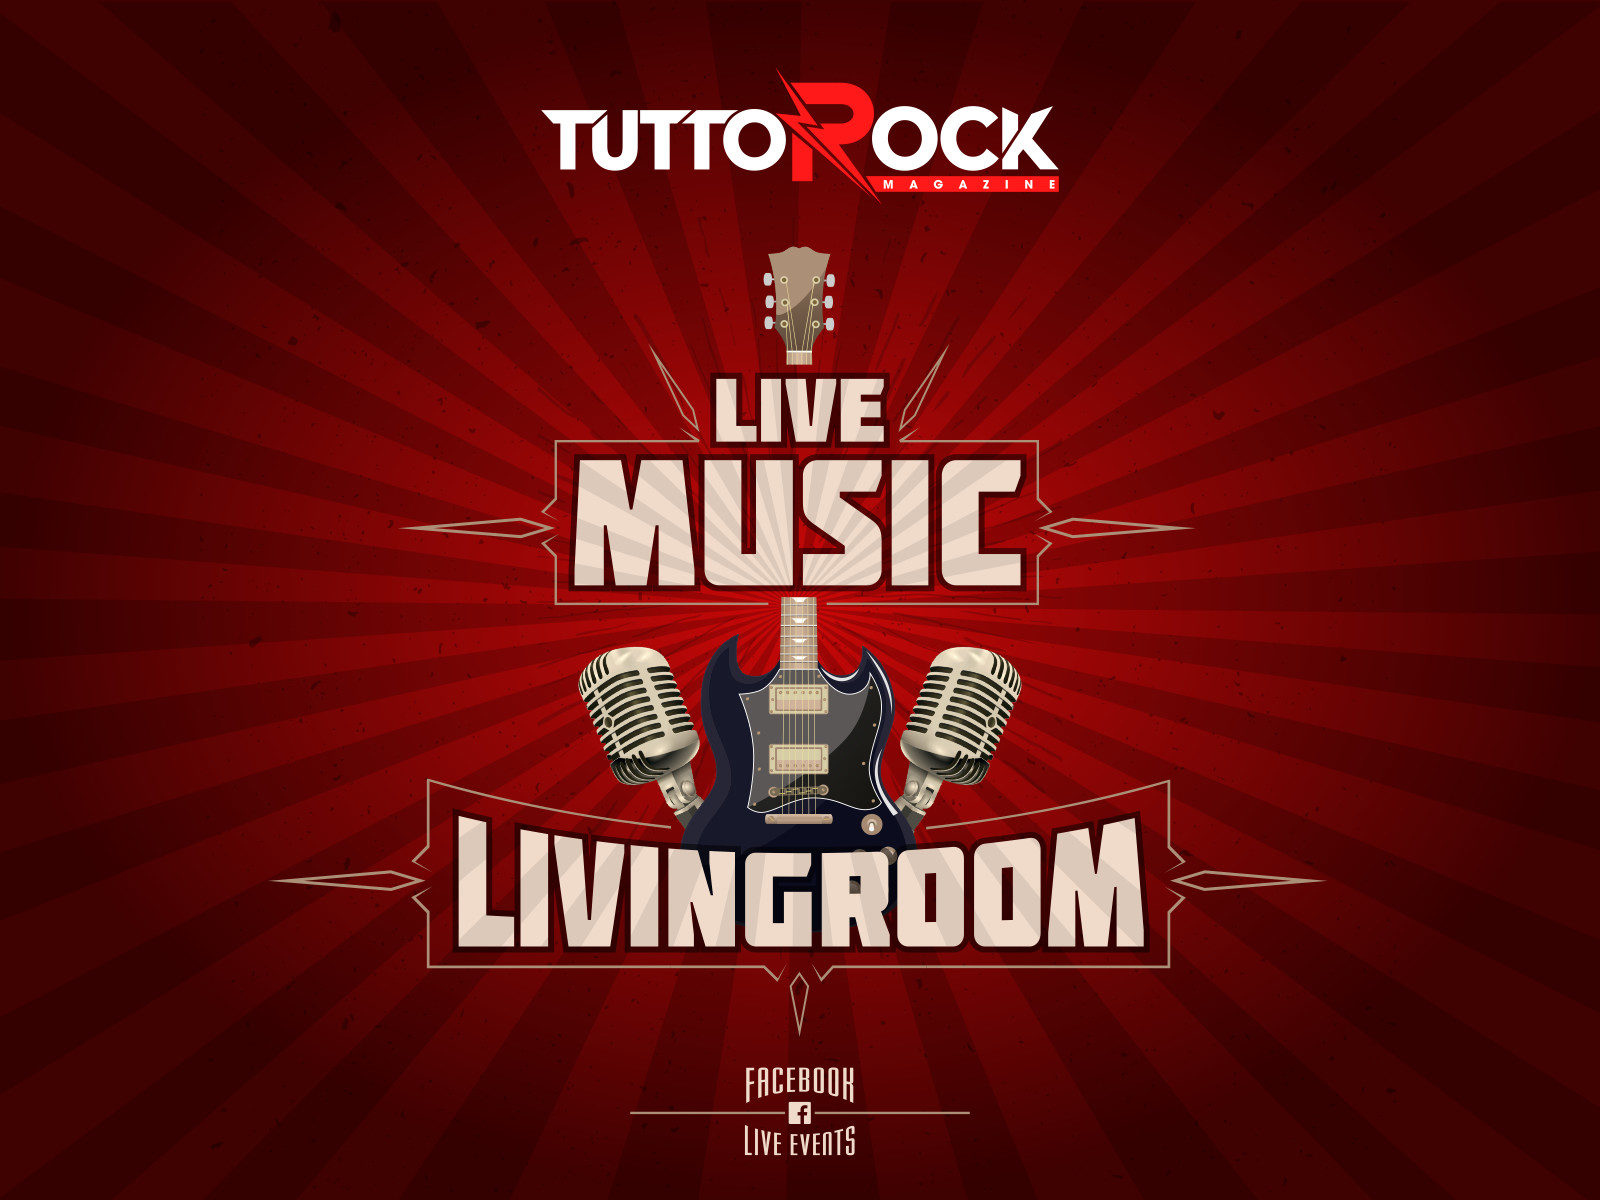 tutto rock live music living room